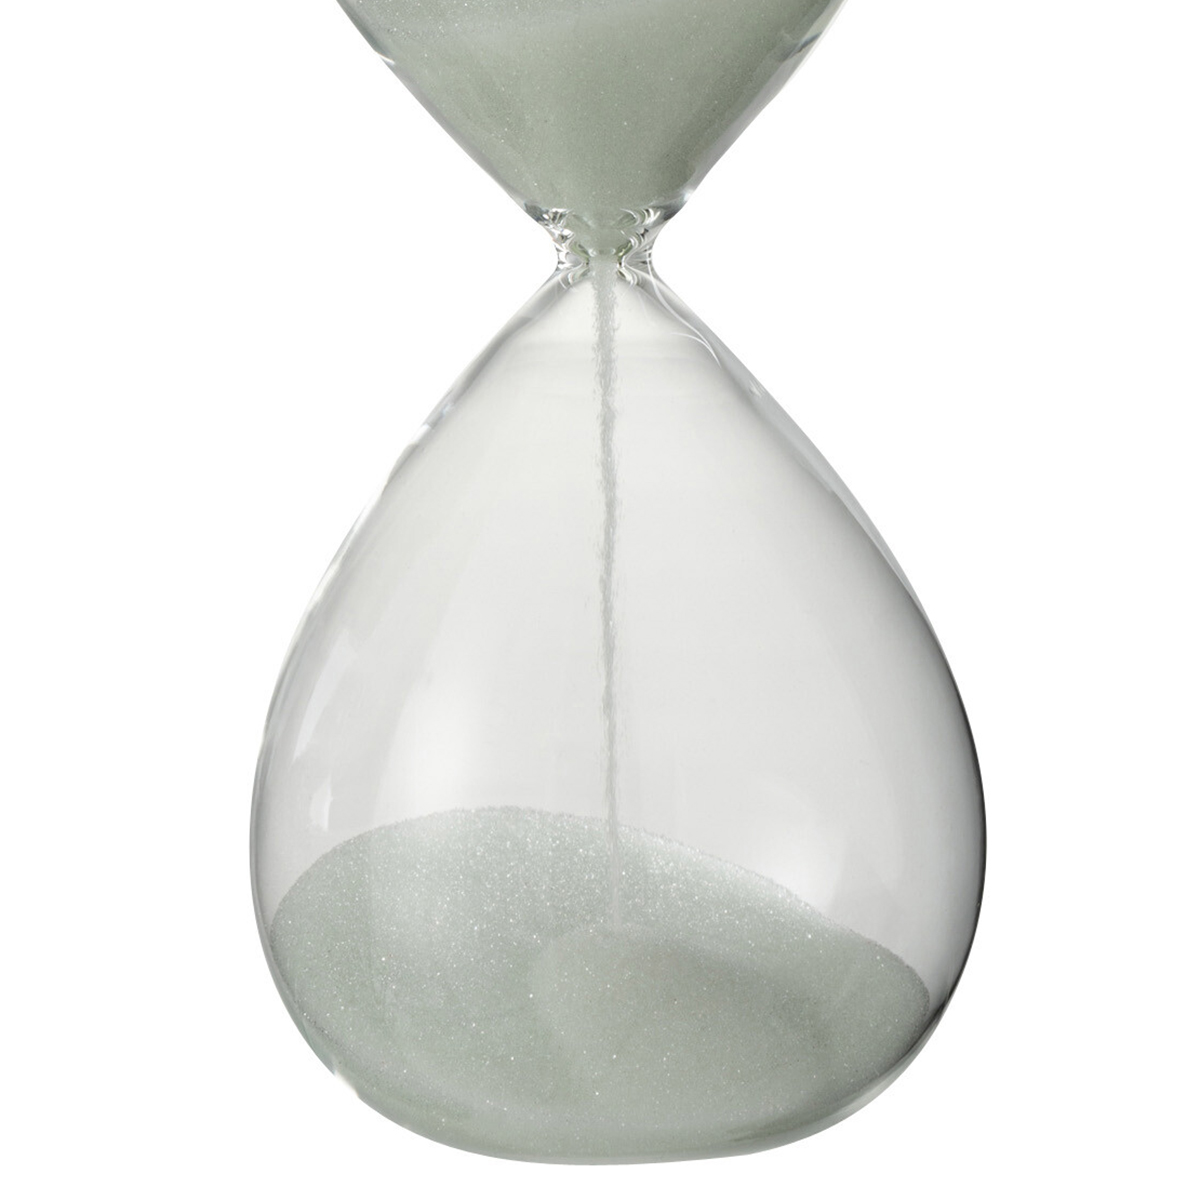 Decorative hourglass in glass and white sand